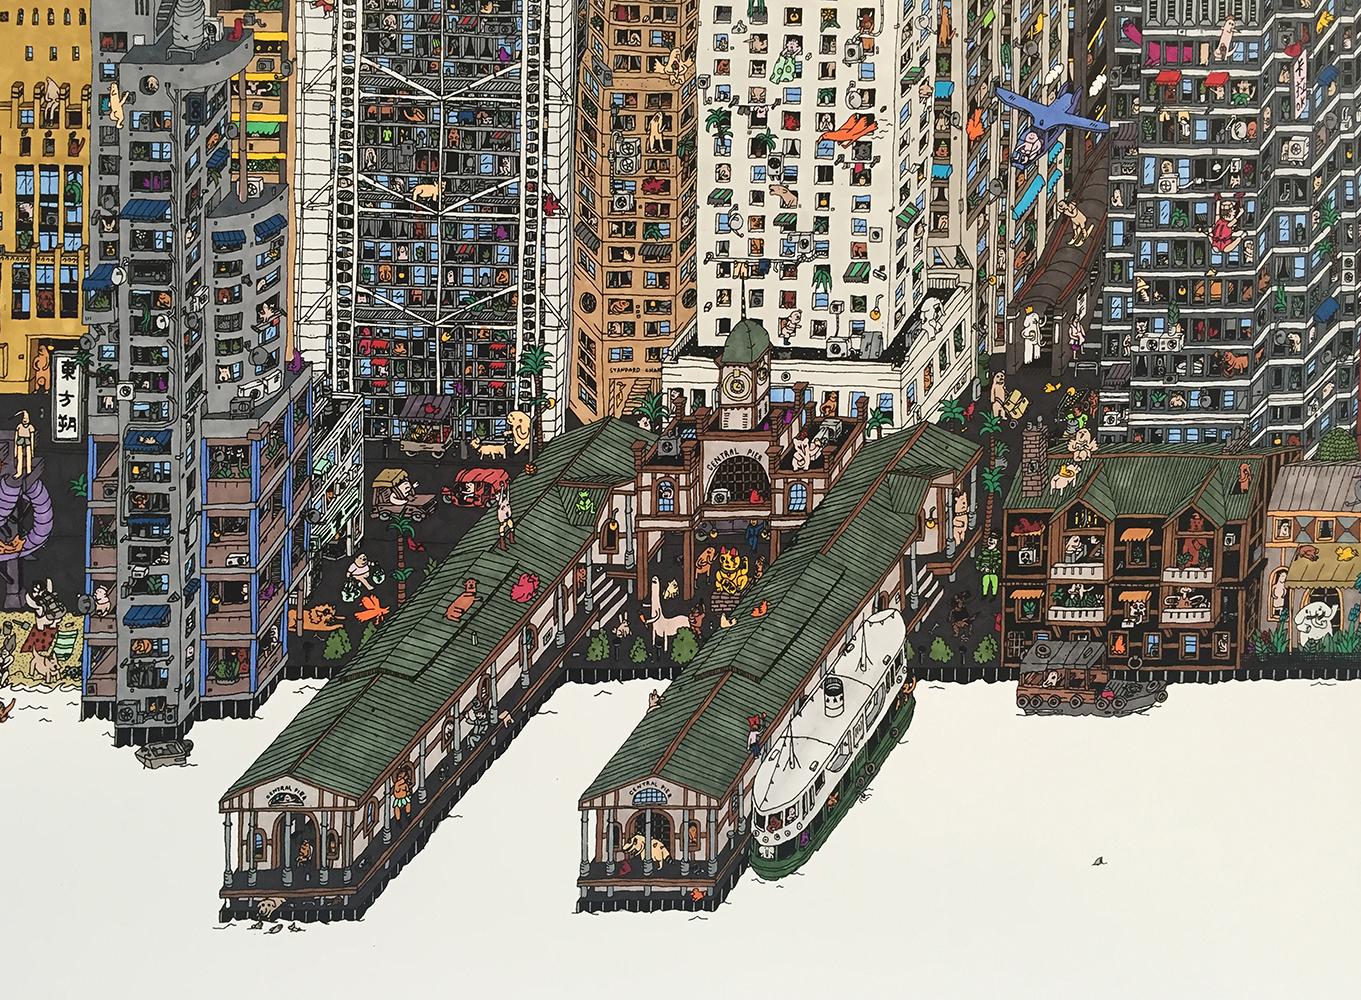 Elephants in Hong Kong, fantastical illustrated cityscape by Guillaume Cornet 1